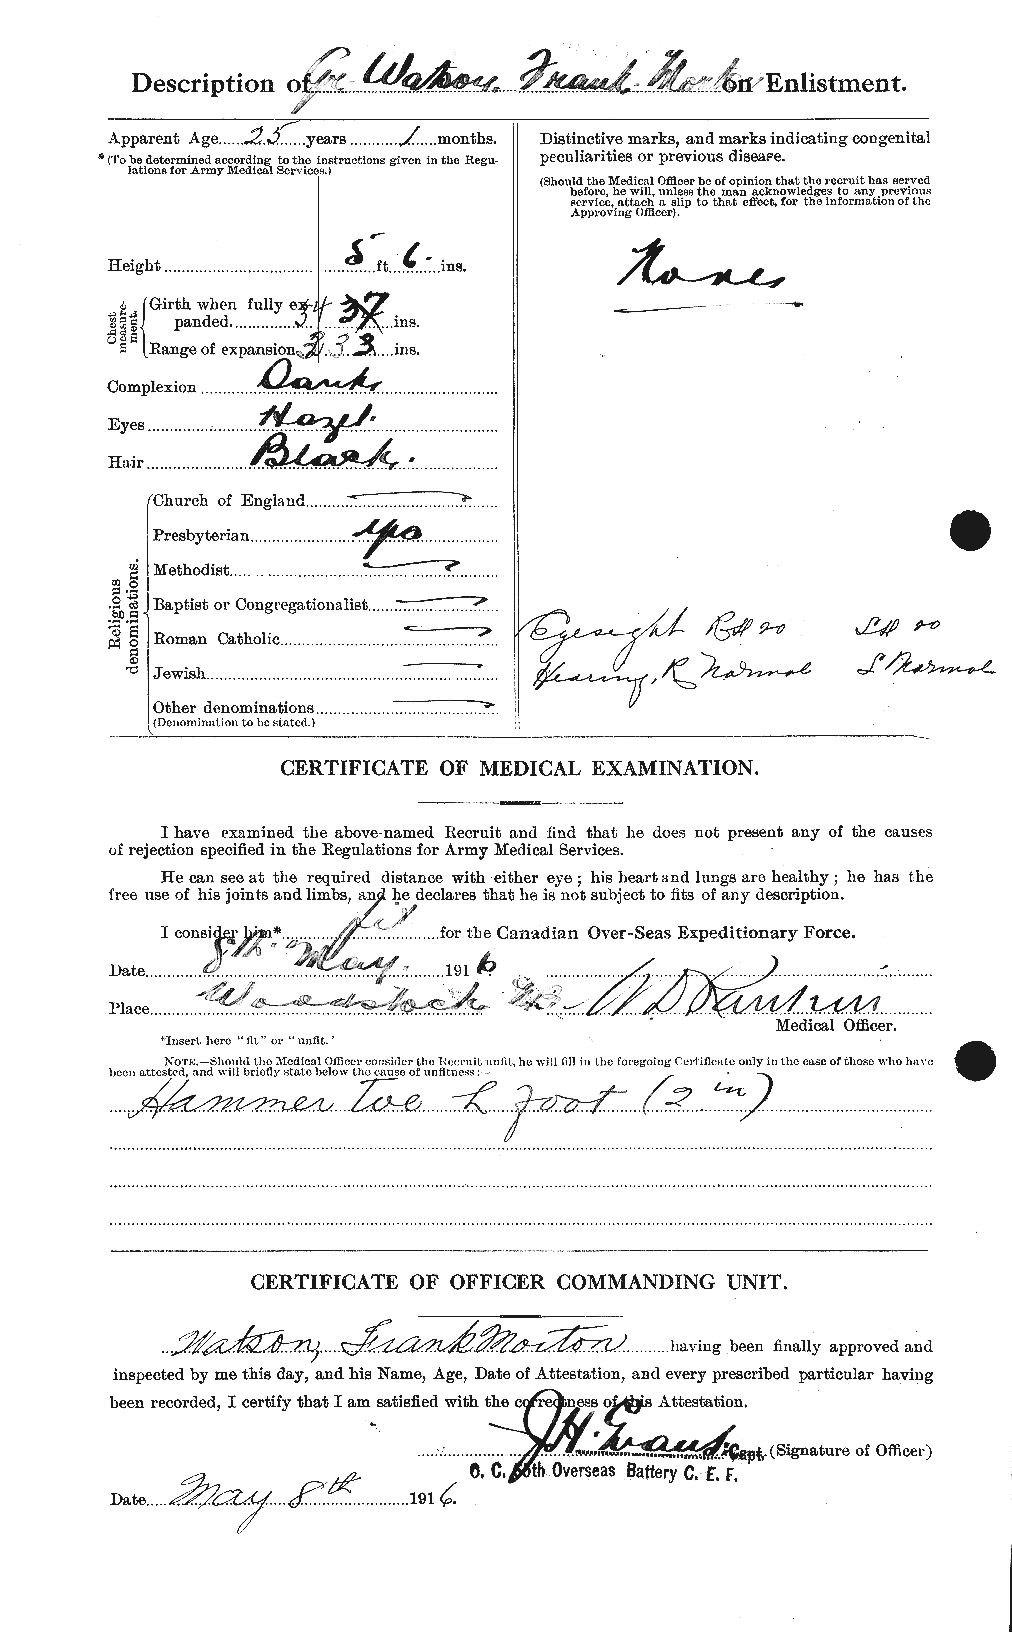 Personnel Records of the First World War - CEF 656707b